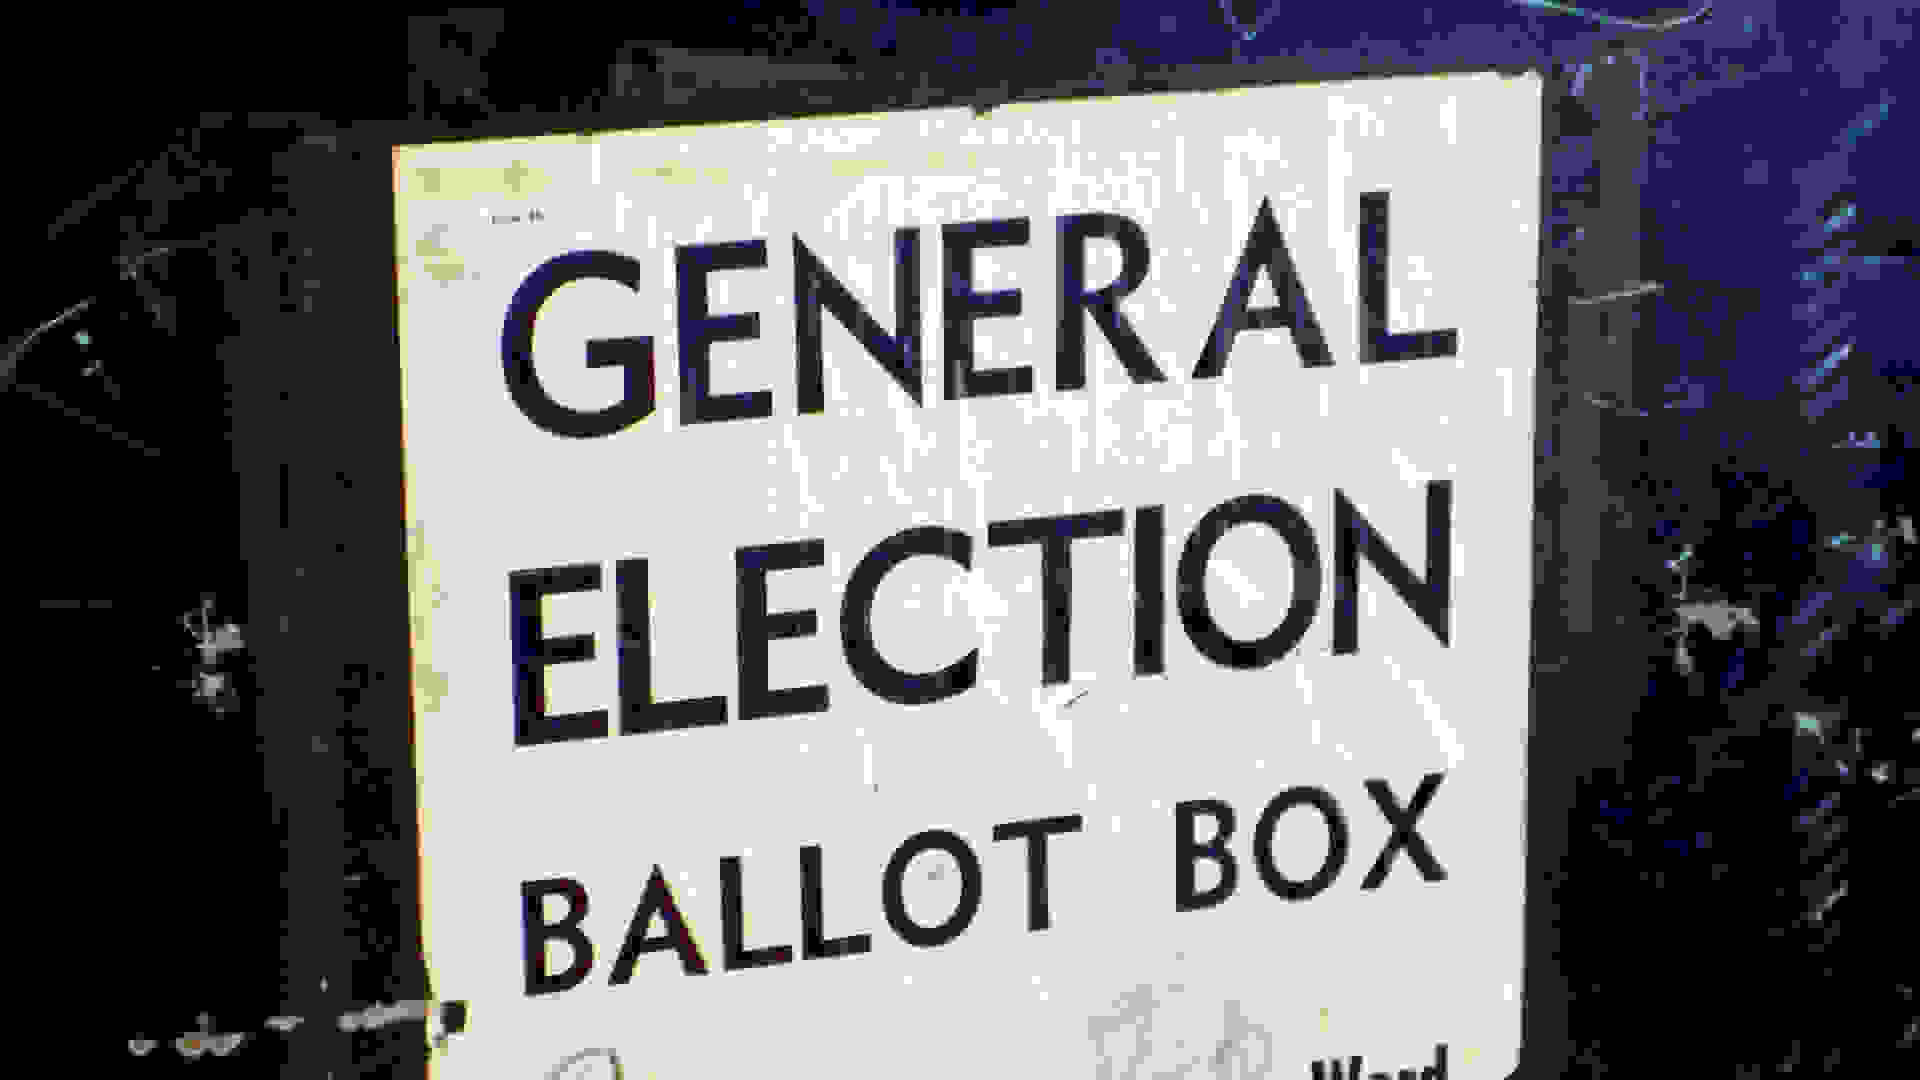 A general election ballot box. | Image Courtesy: Northern Ireland Executive, Licensed under the Creative Commons Attribution 2.0 Generic